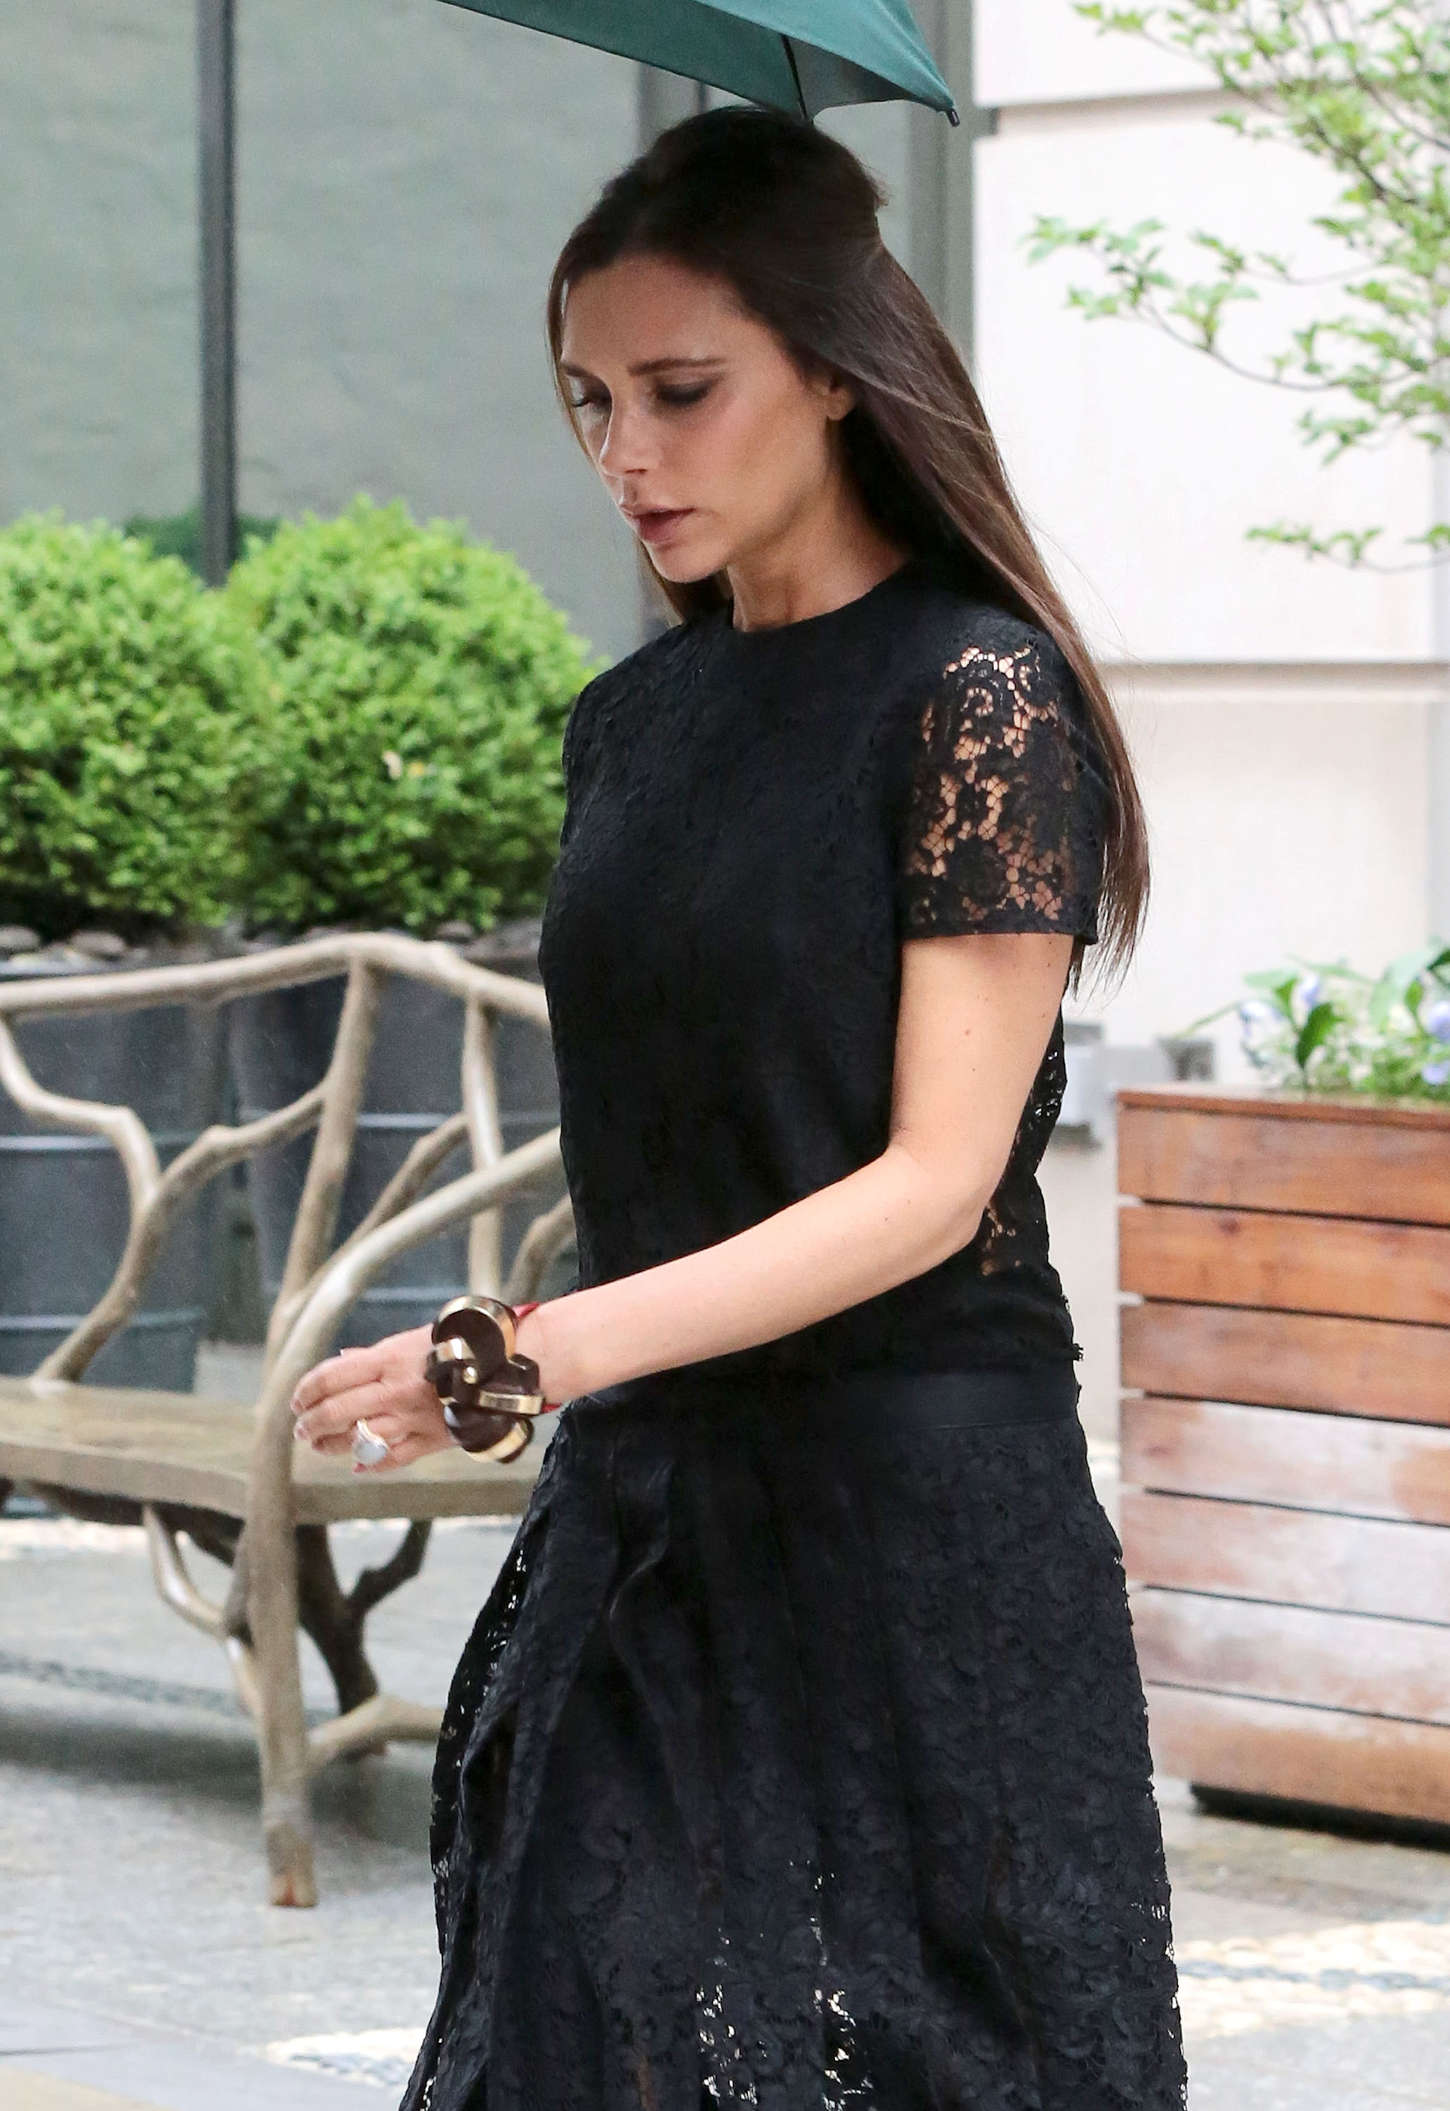 Victoria Beckham in Black Dress Out in NYC